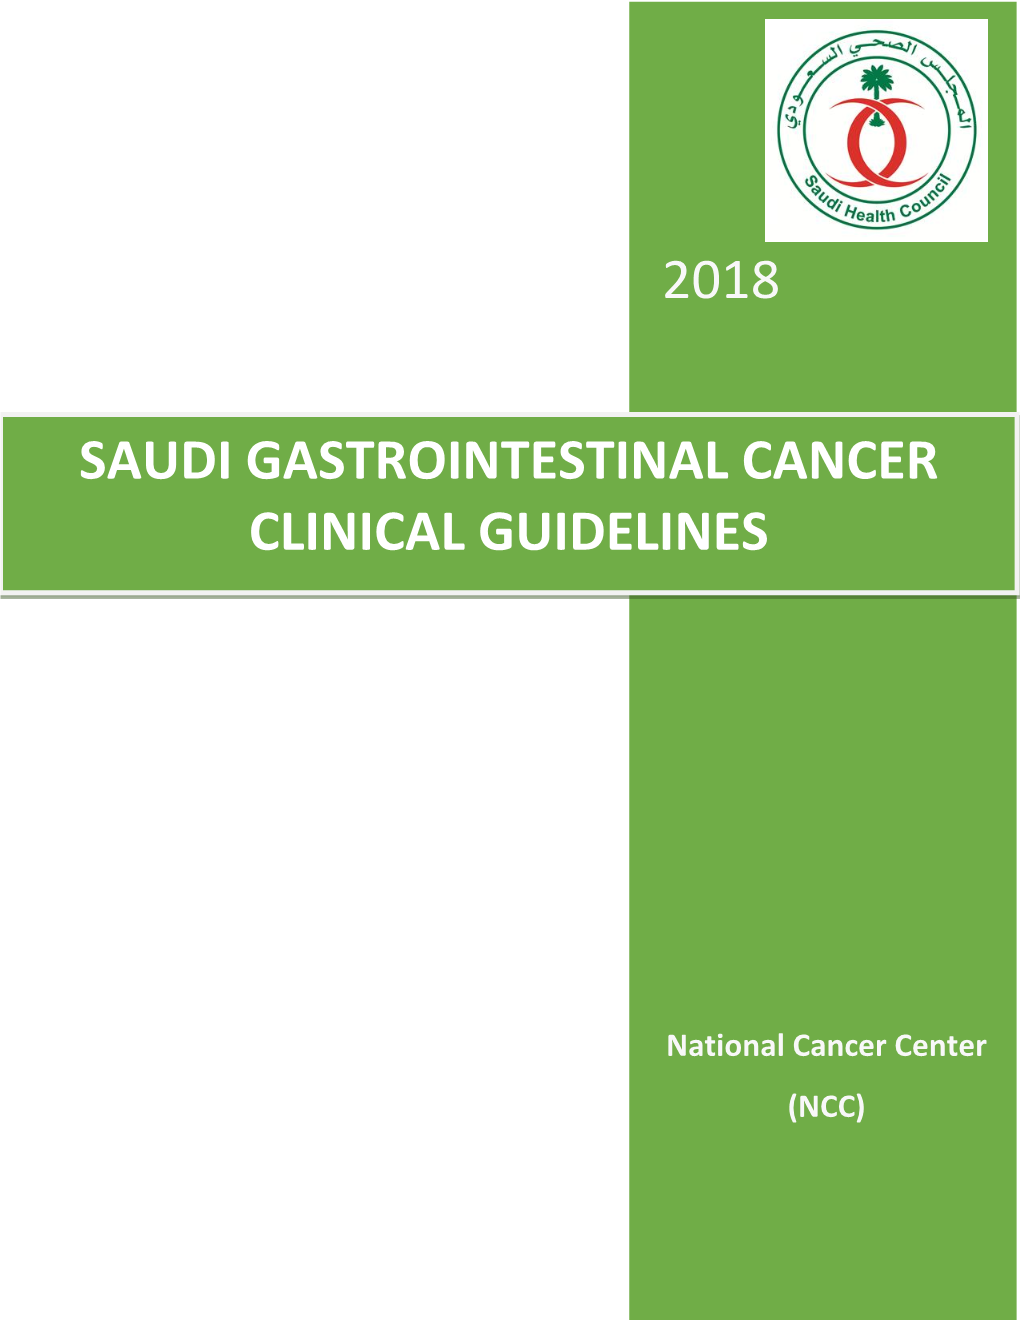 2018 Saudi Gastrointestinal Cancer Clinical Guidelines